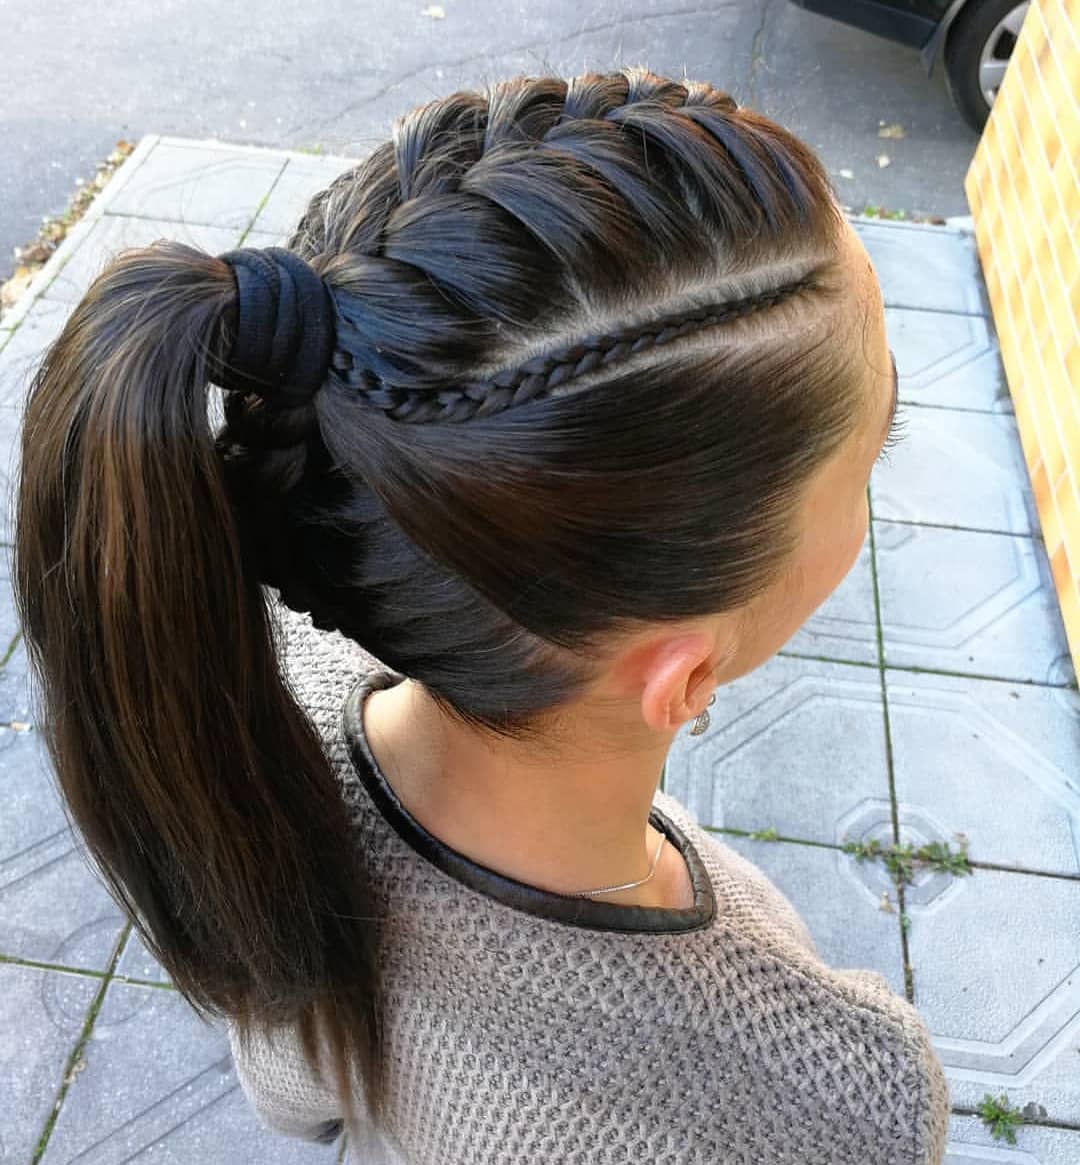 Cute Braided Hair Styles for Woman & Girl - Lovely Long Hairstyle Ideas